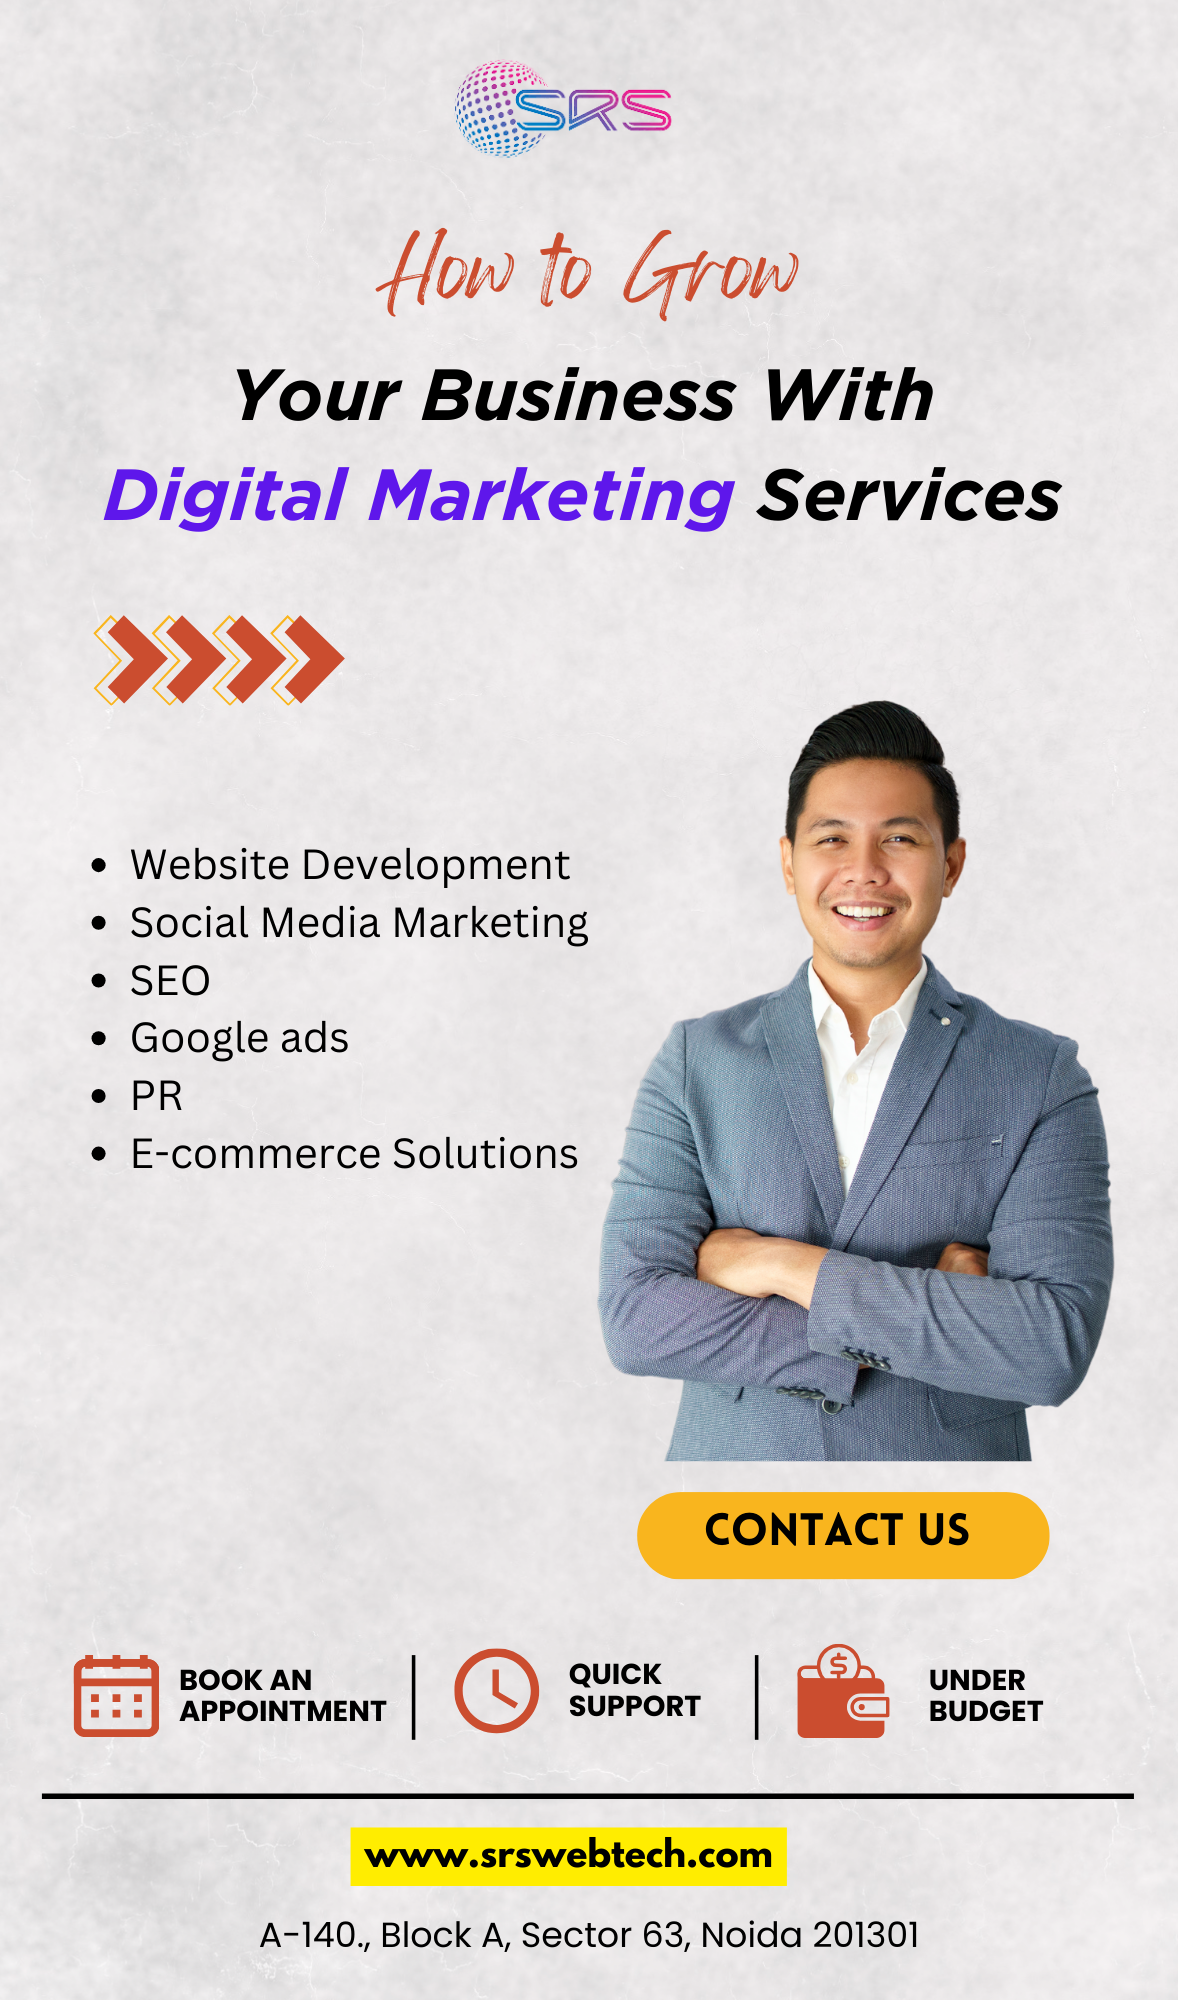 Are You Looking For Digital Marketing Services?